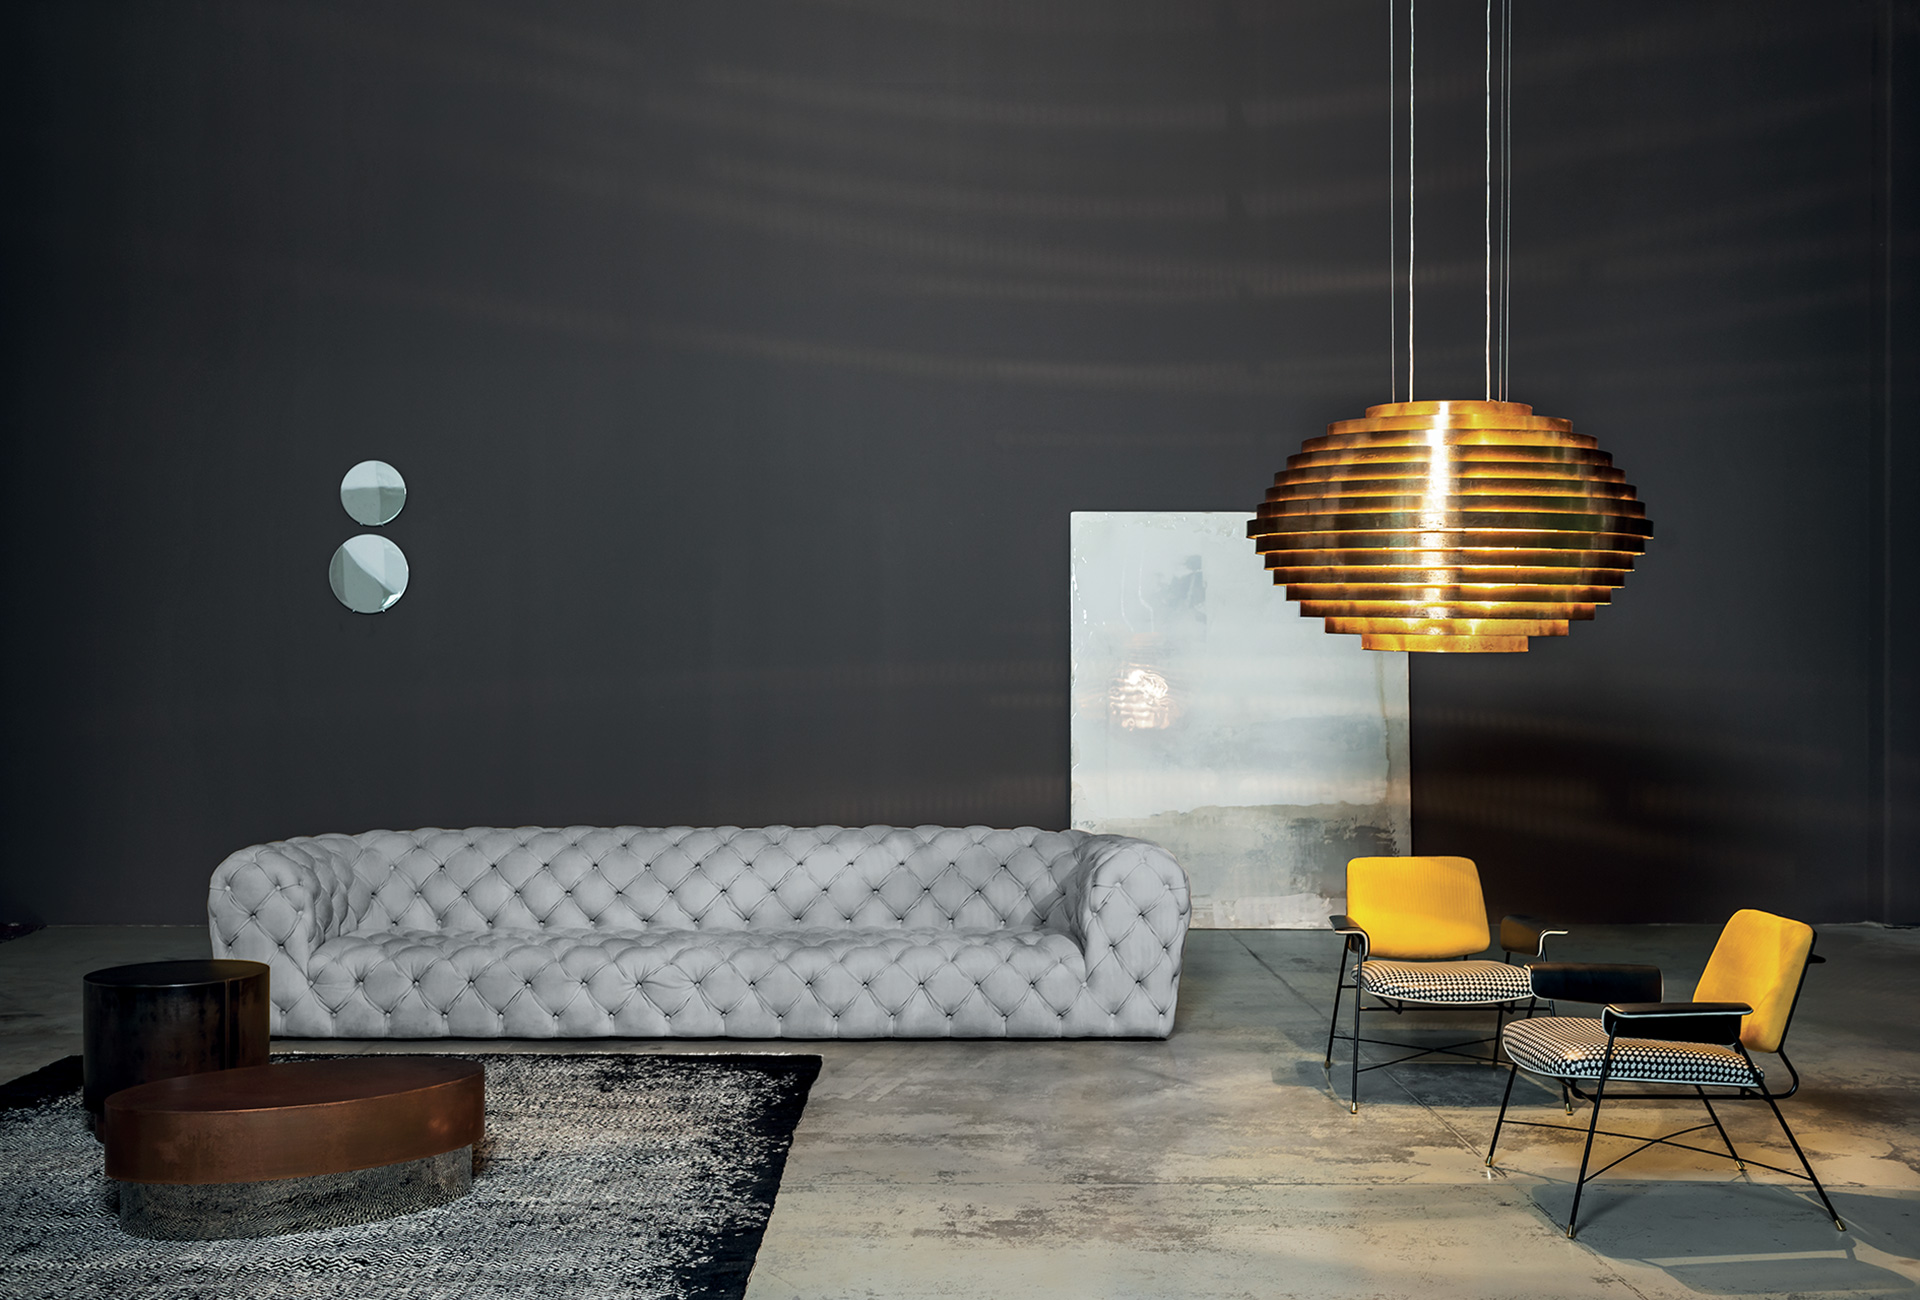 The Chester Moon sofa designed by Paola Navone was born from a reinterpretation of the classic English 'Chester'. Photo c/o Baxter. |The Budapest sofa designed by Paola Navone for Baxter. Photos c/o Baxter. 